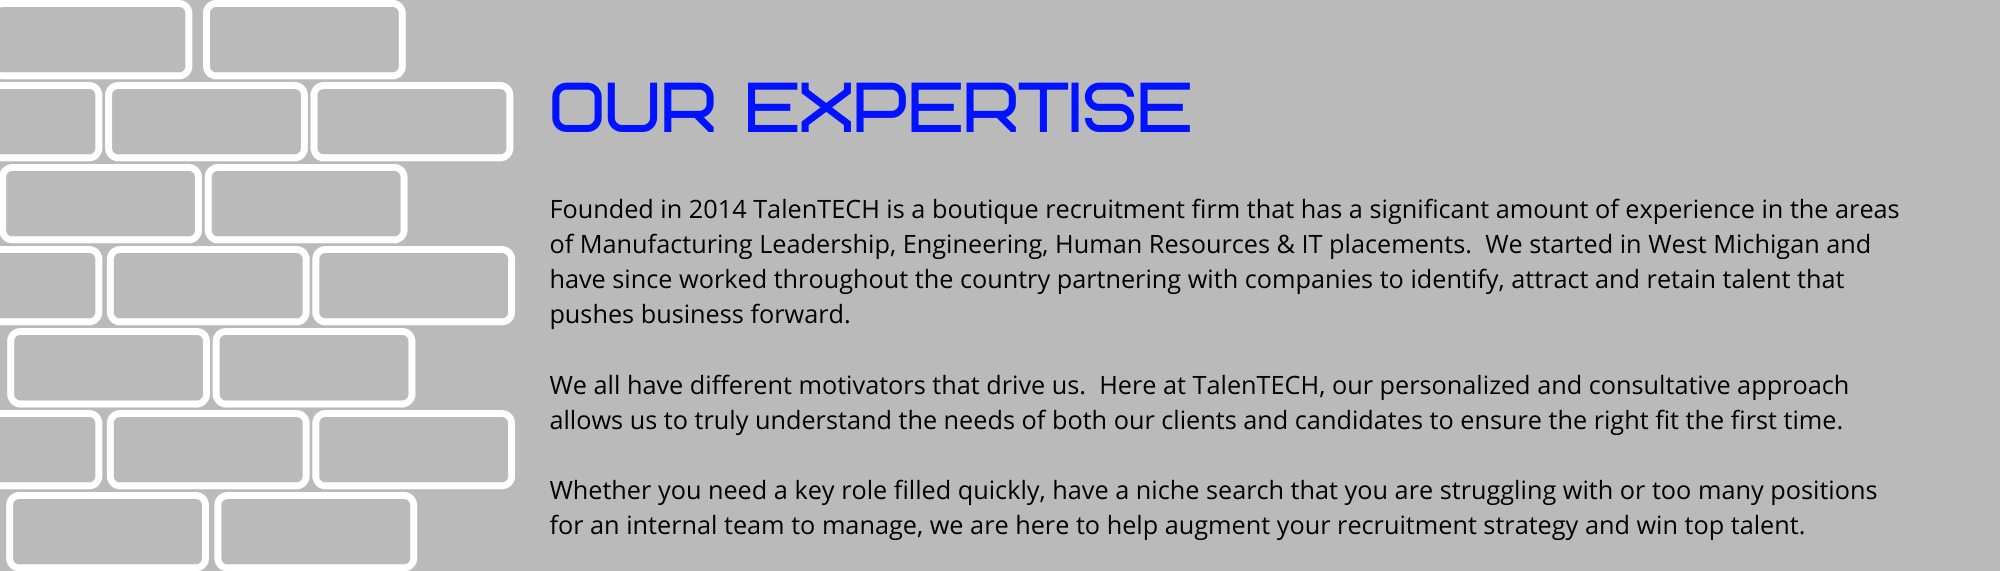 Founded in 2014 TalenTECH is a boutique recruitment firm that has a significant amount of experience in the areas of Manufacturing Leadership, Engineering, Human Resources & IT placements. We started in West Michigan and have since worked throughout the country partnering with companies to identify, attract and retain talent that pushes business forward. We all have different motivators that drive us. Here at TalenTECH, our personalized and consultative approach allows us to truly understand the needs of both our clients and candidates to ensure the right fit the first time. Whether you need a key role filled quickly, have a niche search that you are struggling with or too many positions for an internal team to manage, we are here to help augment your recruitment strategy and win top talent.